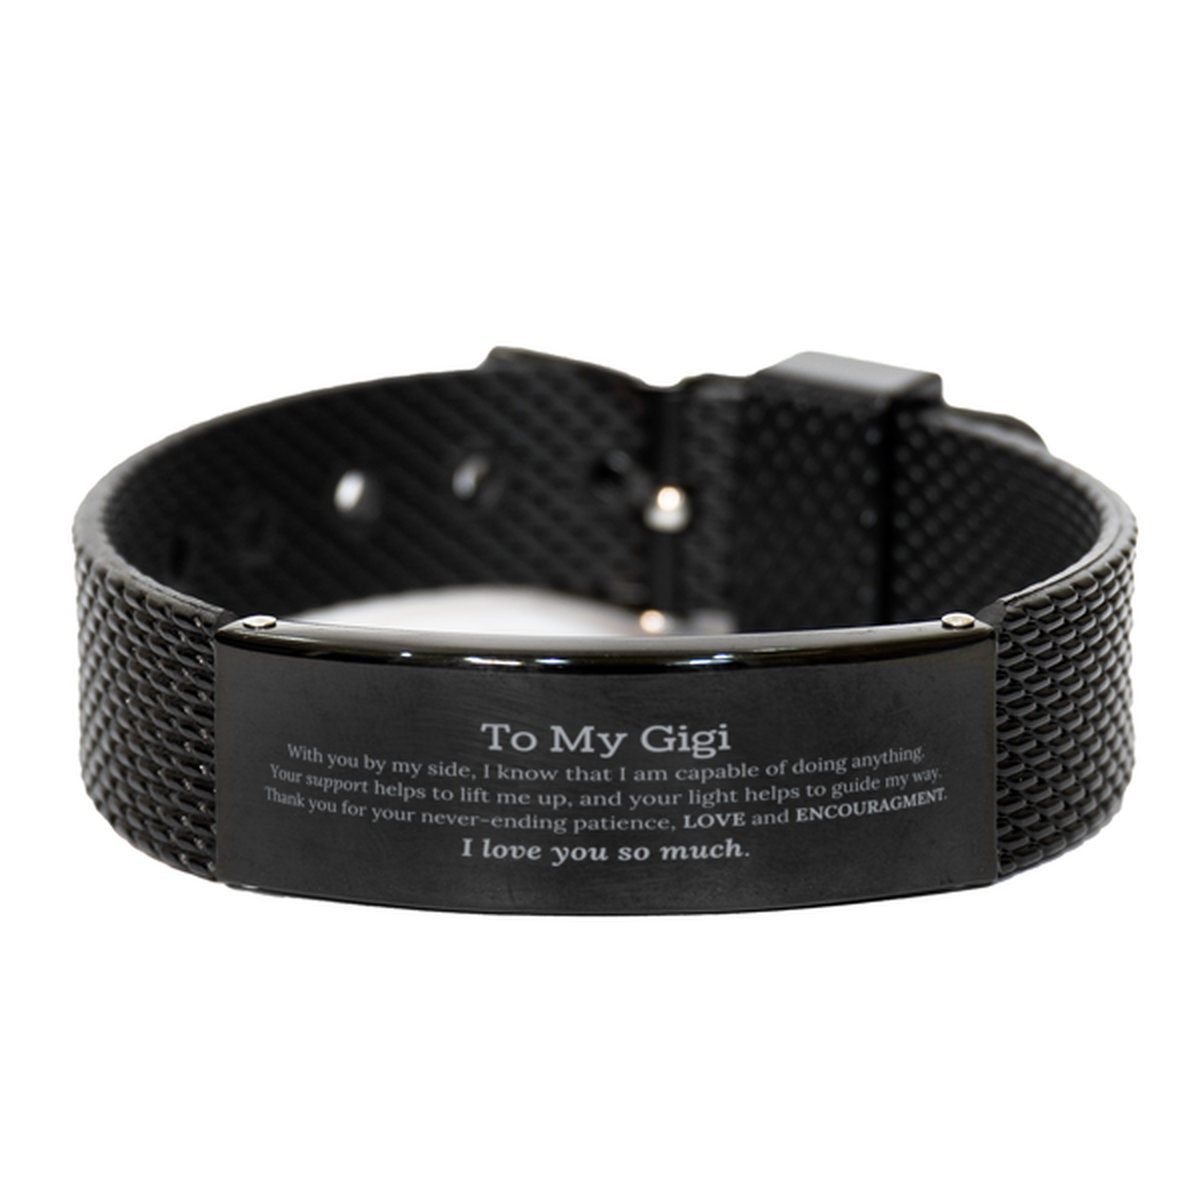 Appreciation Gigi Black Shark Mesh Bracelet Gifts, To My Gigi Birthday Christmas Wedding Keepsake Gifts for Gigi With you by my side, I know that I am capable of doing anything. I love you so much